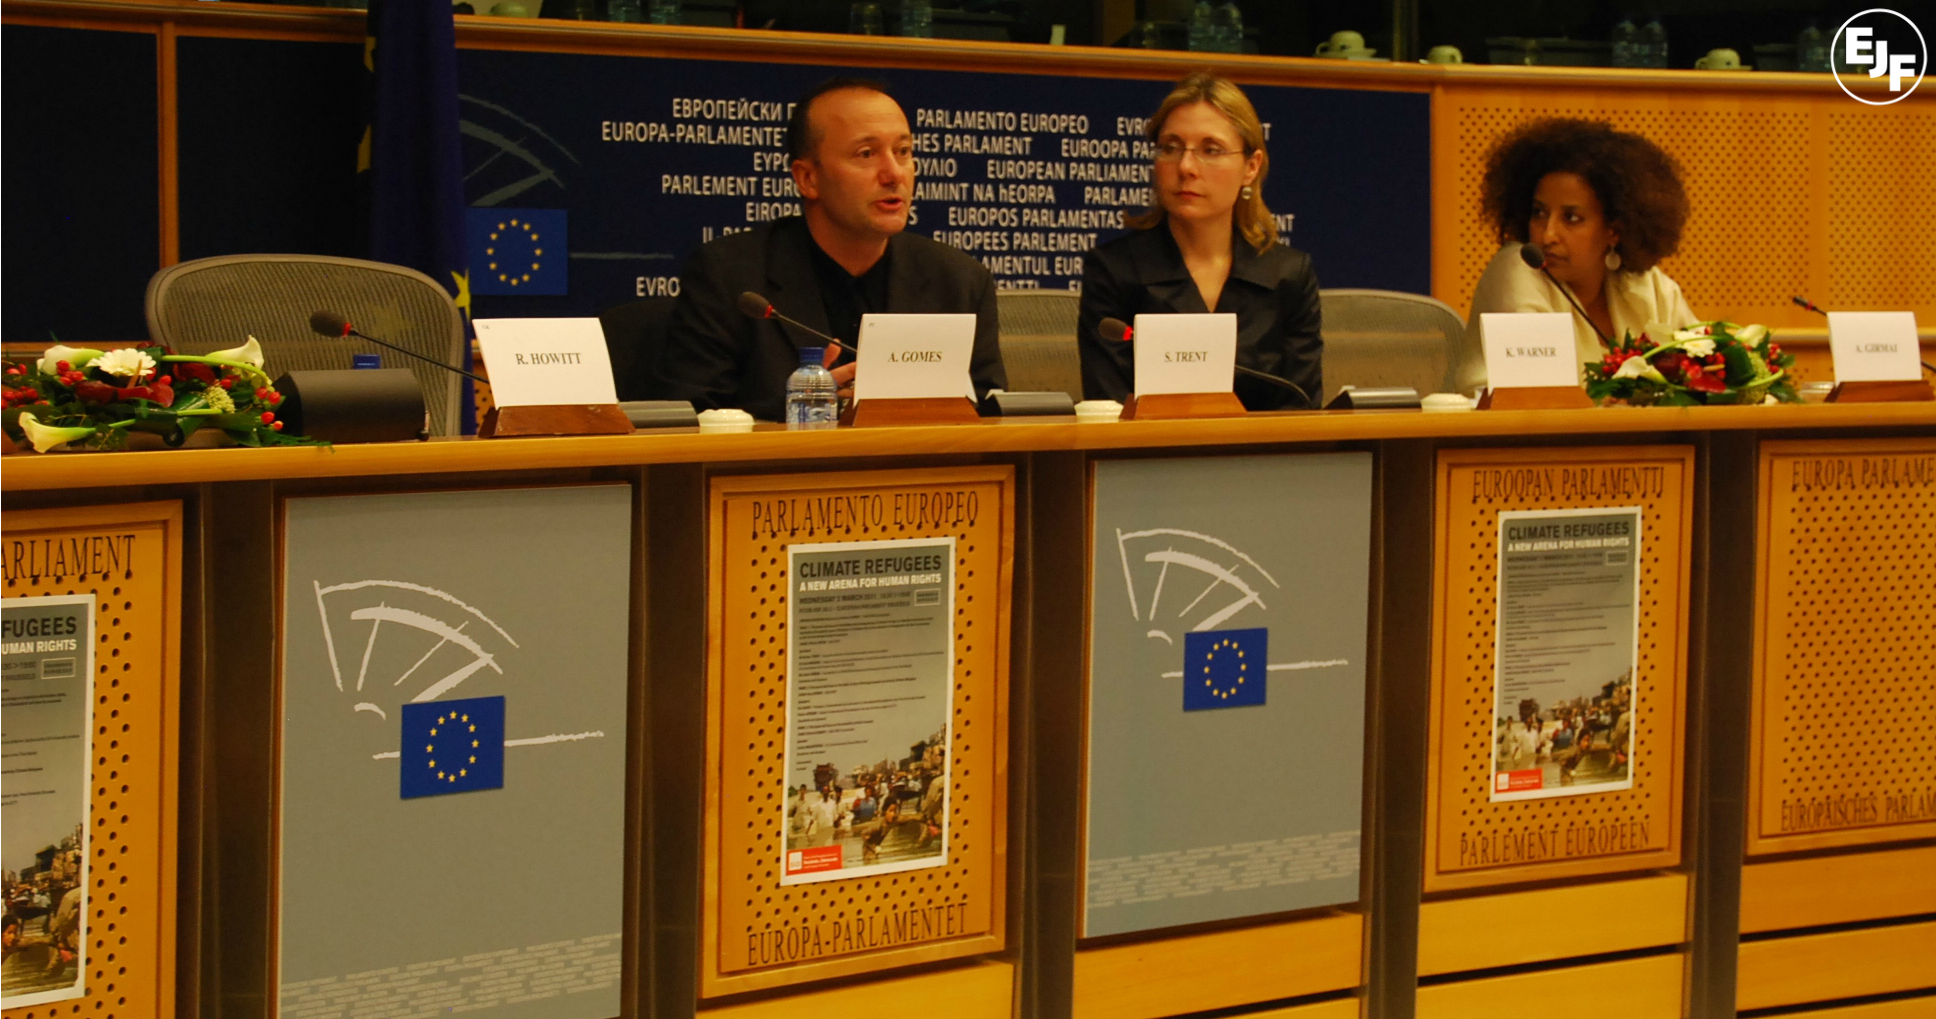 EJF brings the issue of climate refugees to the European Parliament